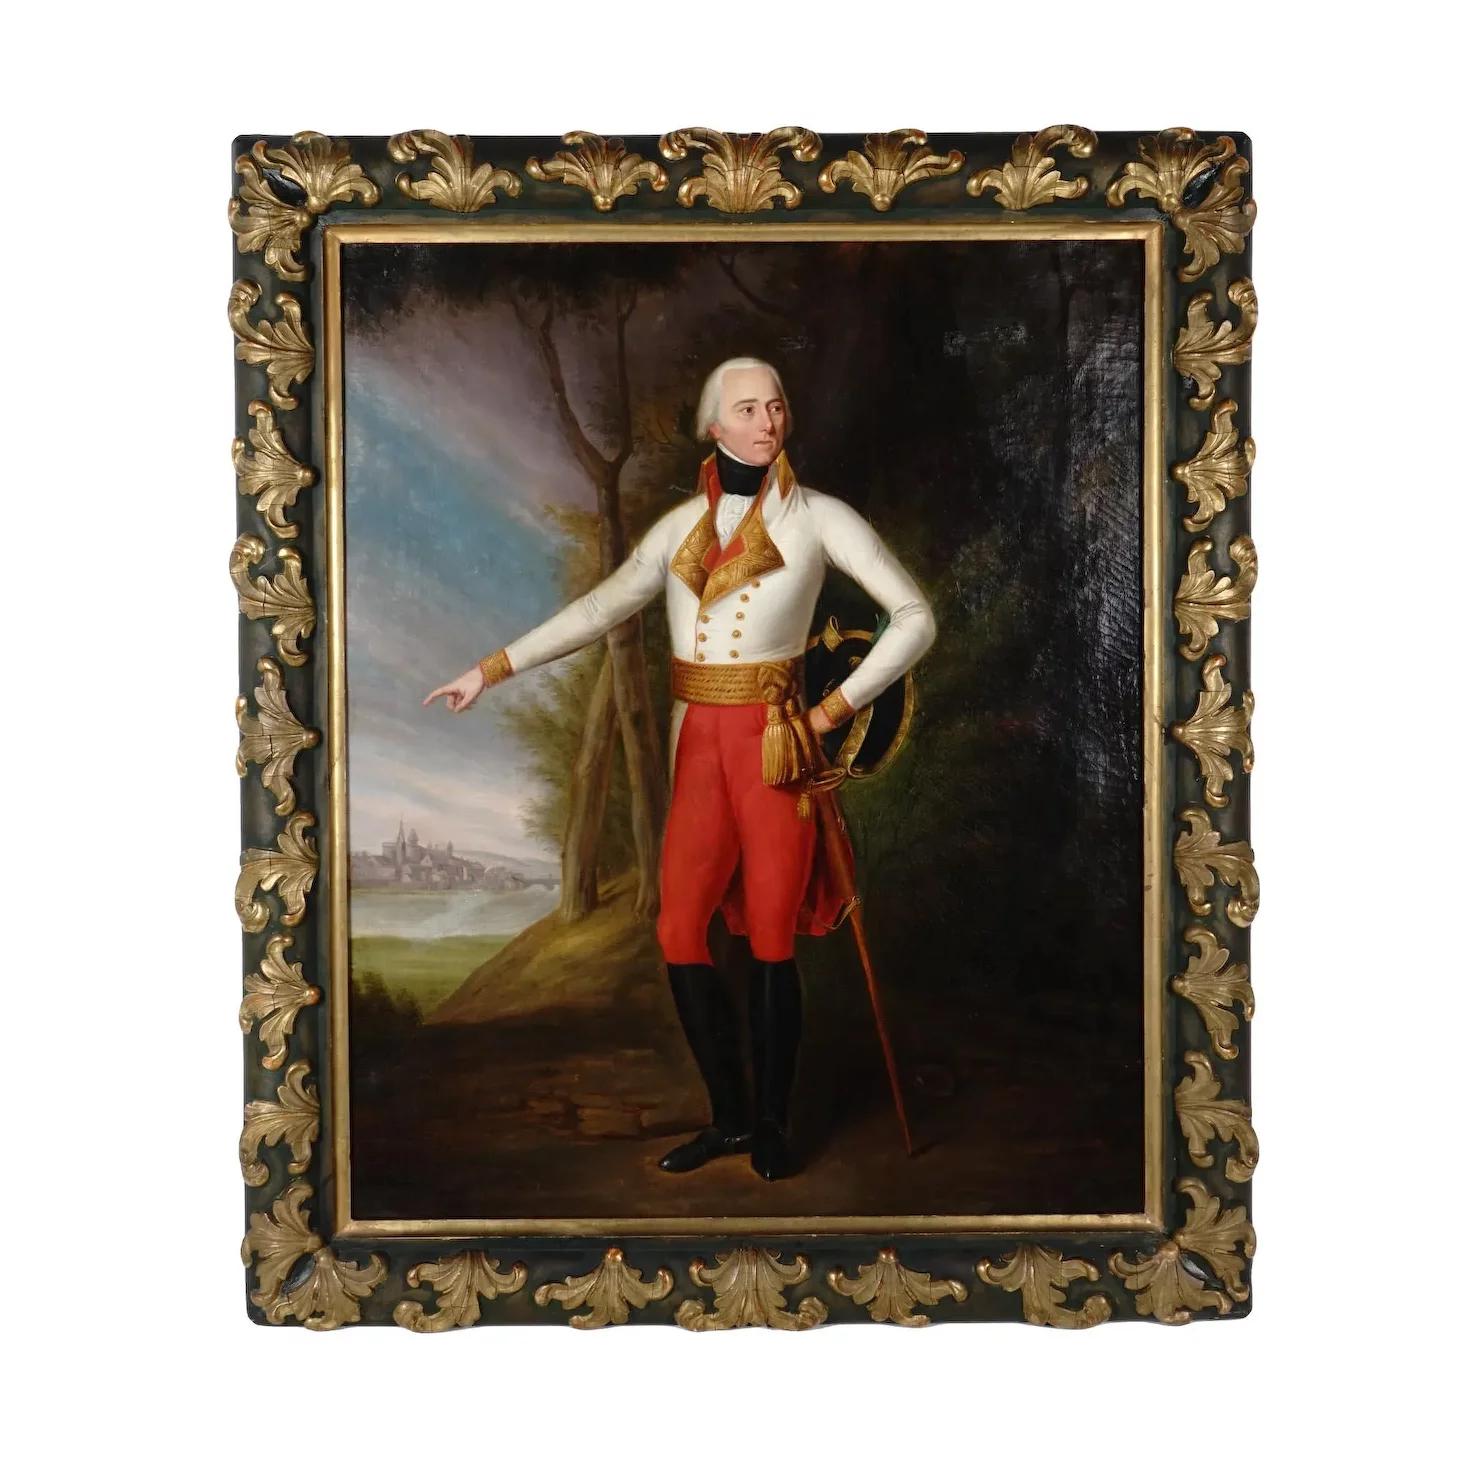 Oil on canvas painting, a full-length portrait of a gray-haired stabs-officer in red pants and a white coat. He is pointing to the town that is depicted in the background. The uniform indicates that the man is most likely an Austrian.18th-century